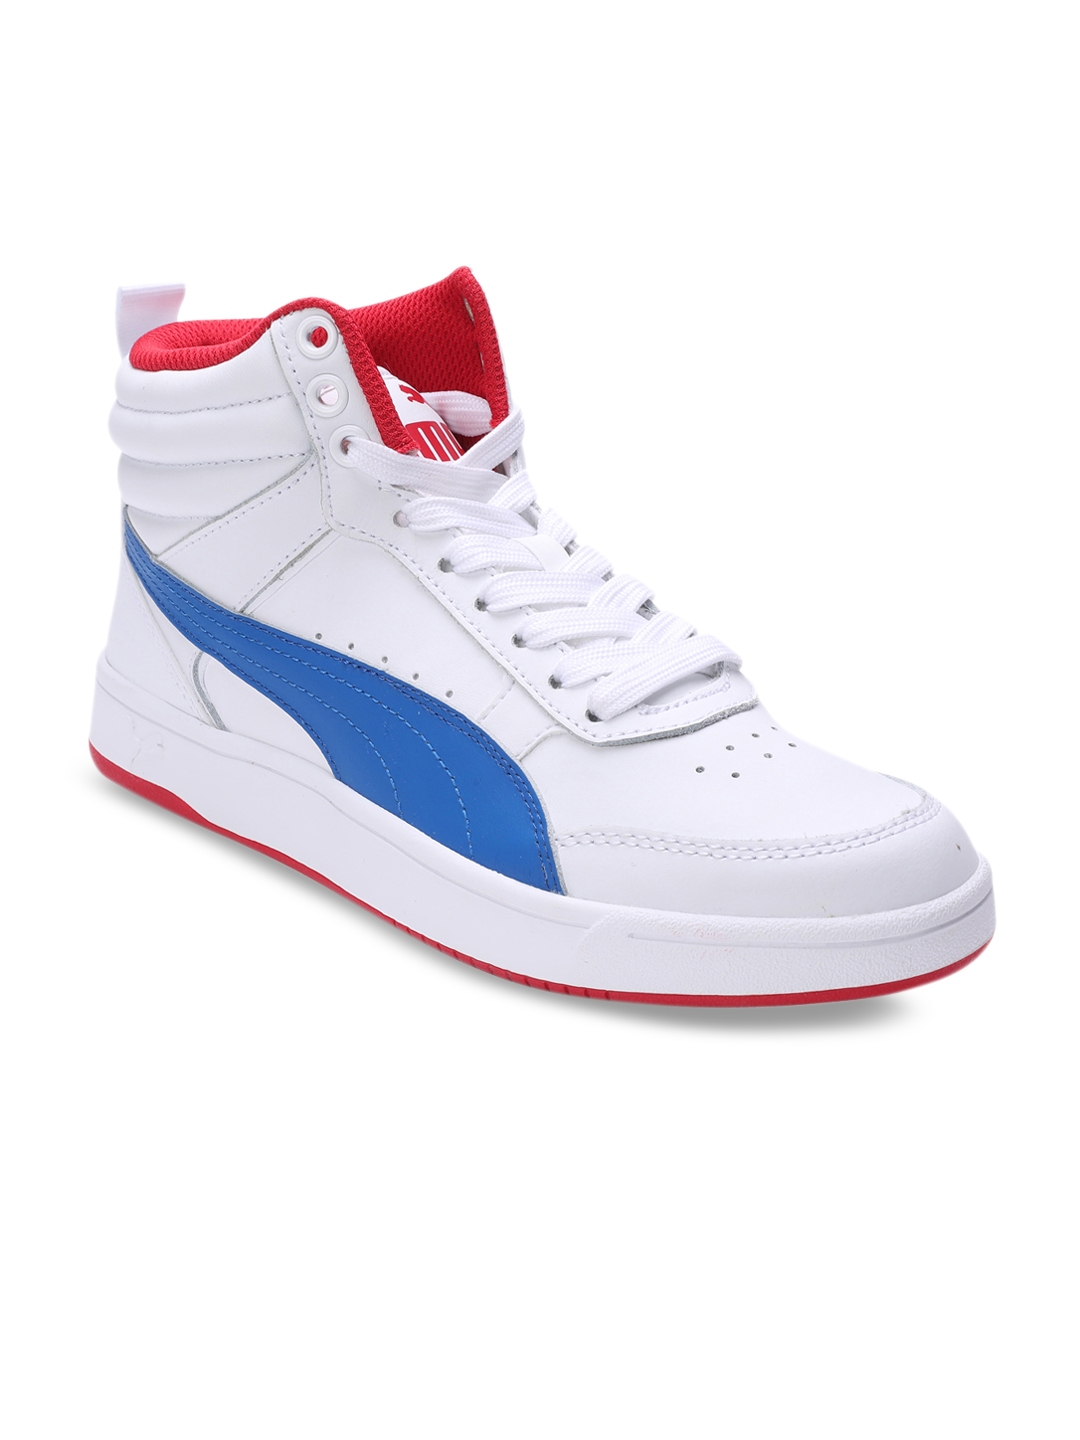 Buy Puma Unisex White Leather Sneakers - Casual Shoes for Unisex Kids ...